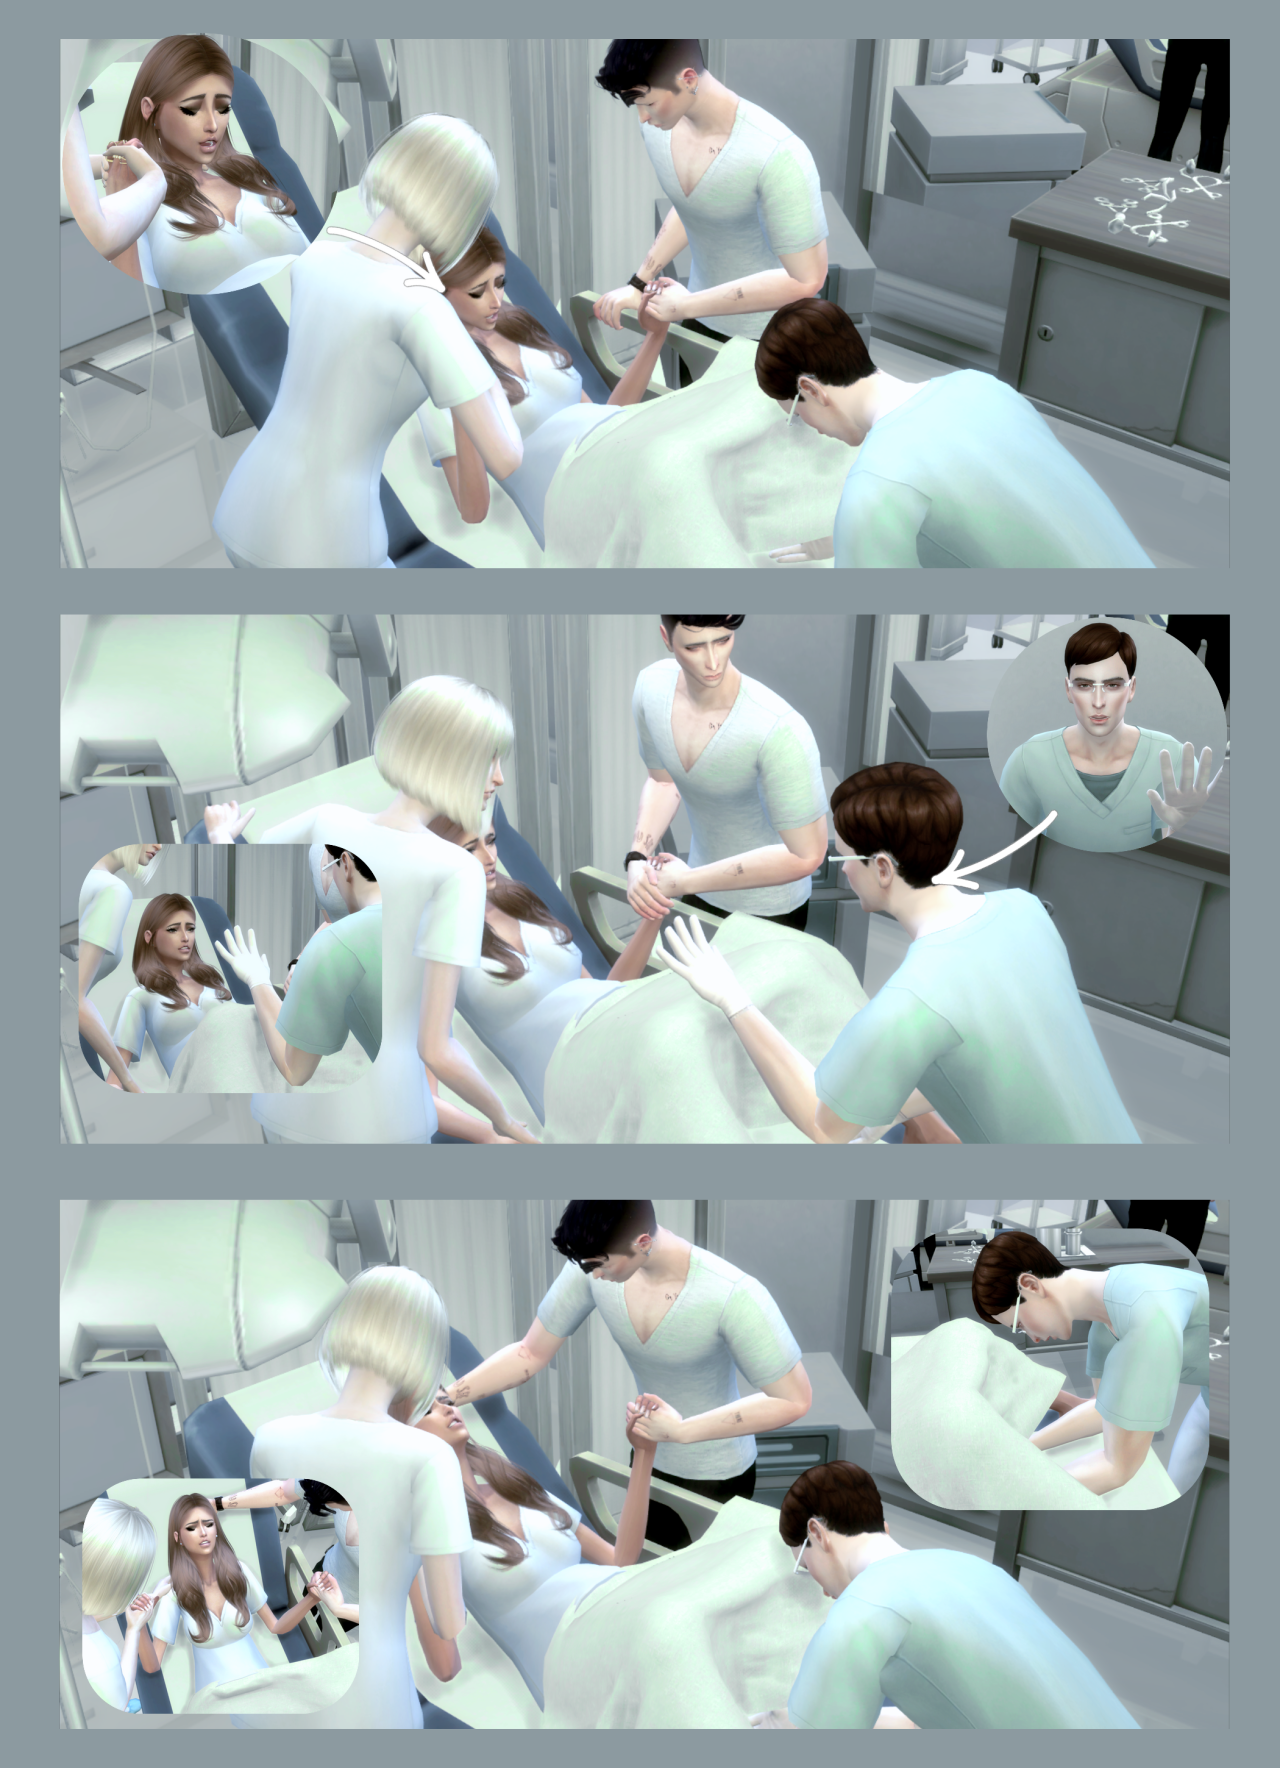 (TS4)Delivery Pose Set 1 & 2 | Trio Pose 1 - Pose Pack version + BlanketDownload : Mediafire | SimFileShare
About :
• Incuding 3 packages :
• Delivery Trio Pose 1 - “Consultation” : 3 Poses
• Delivery Pose Set 1 - “Labor” (in 3 steps ) : 12 poses in...